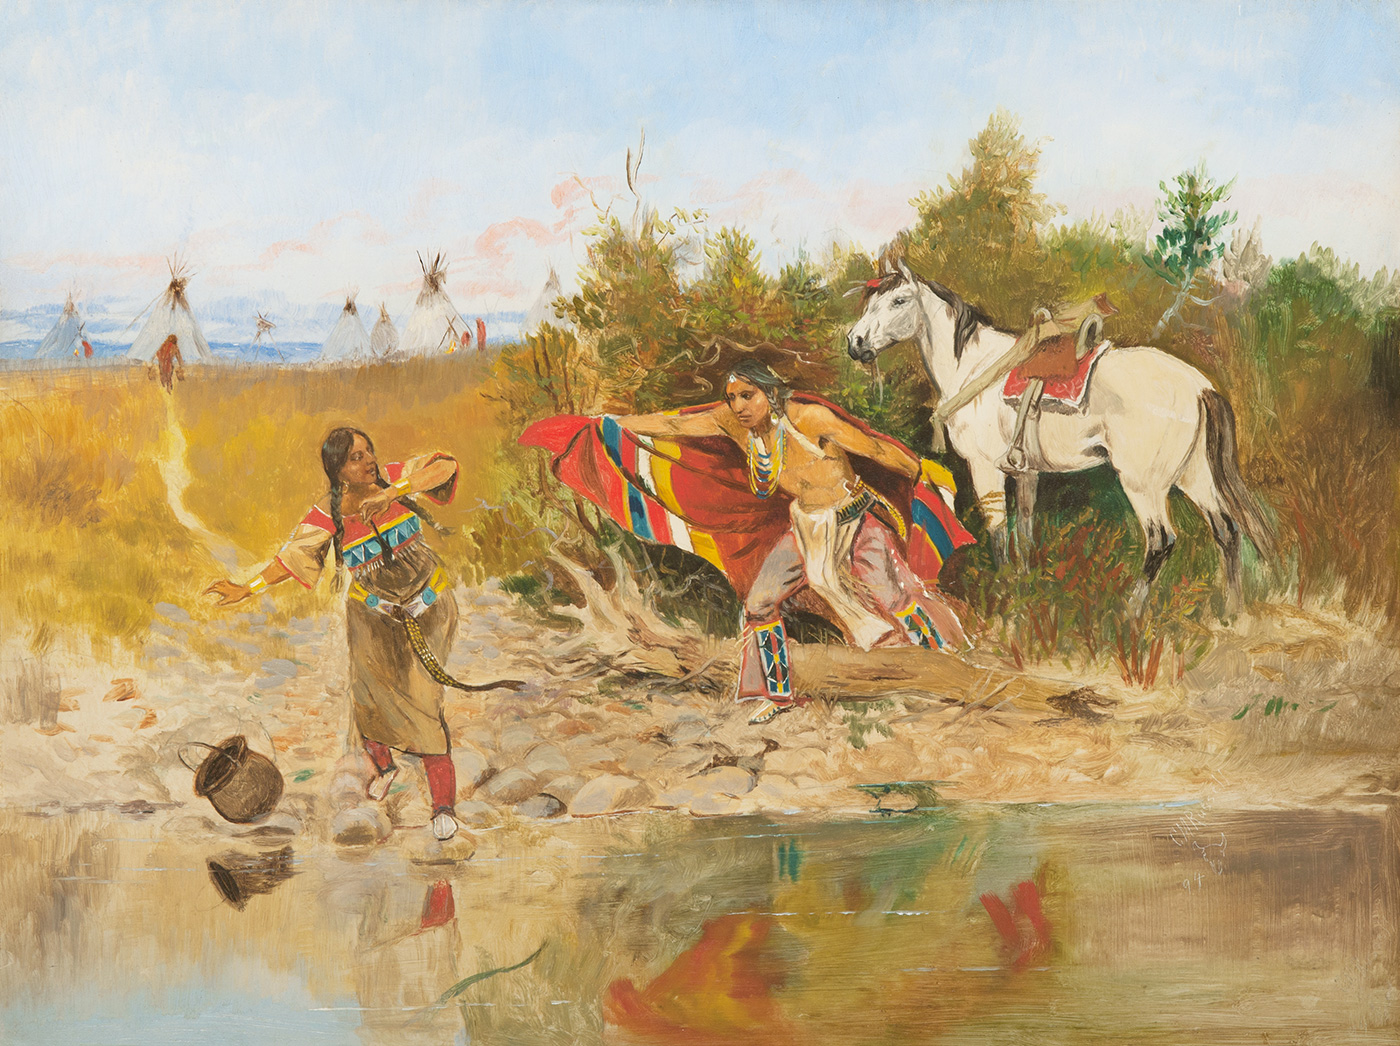 A young indigenous American man approaches an indigenous woman by a stream.